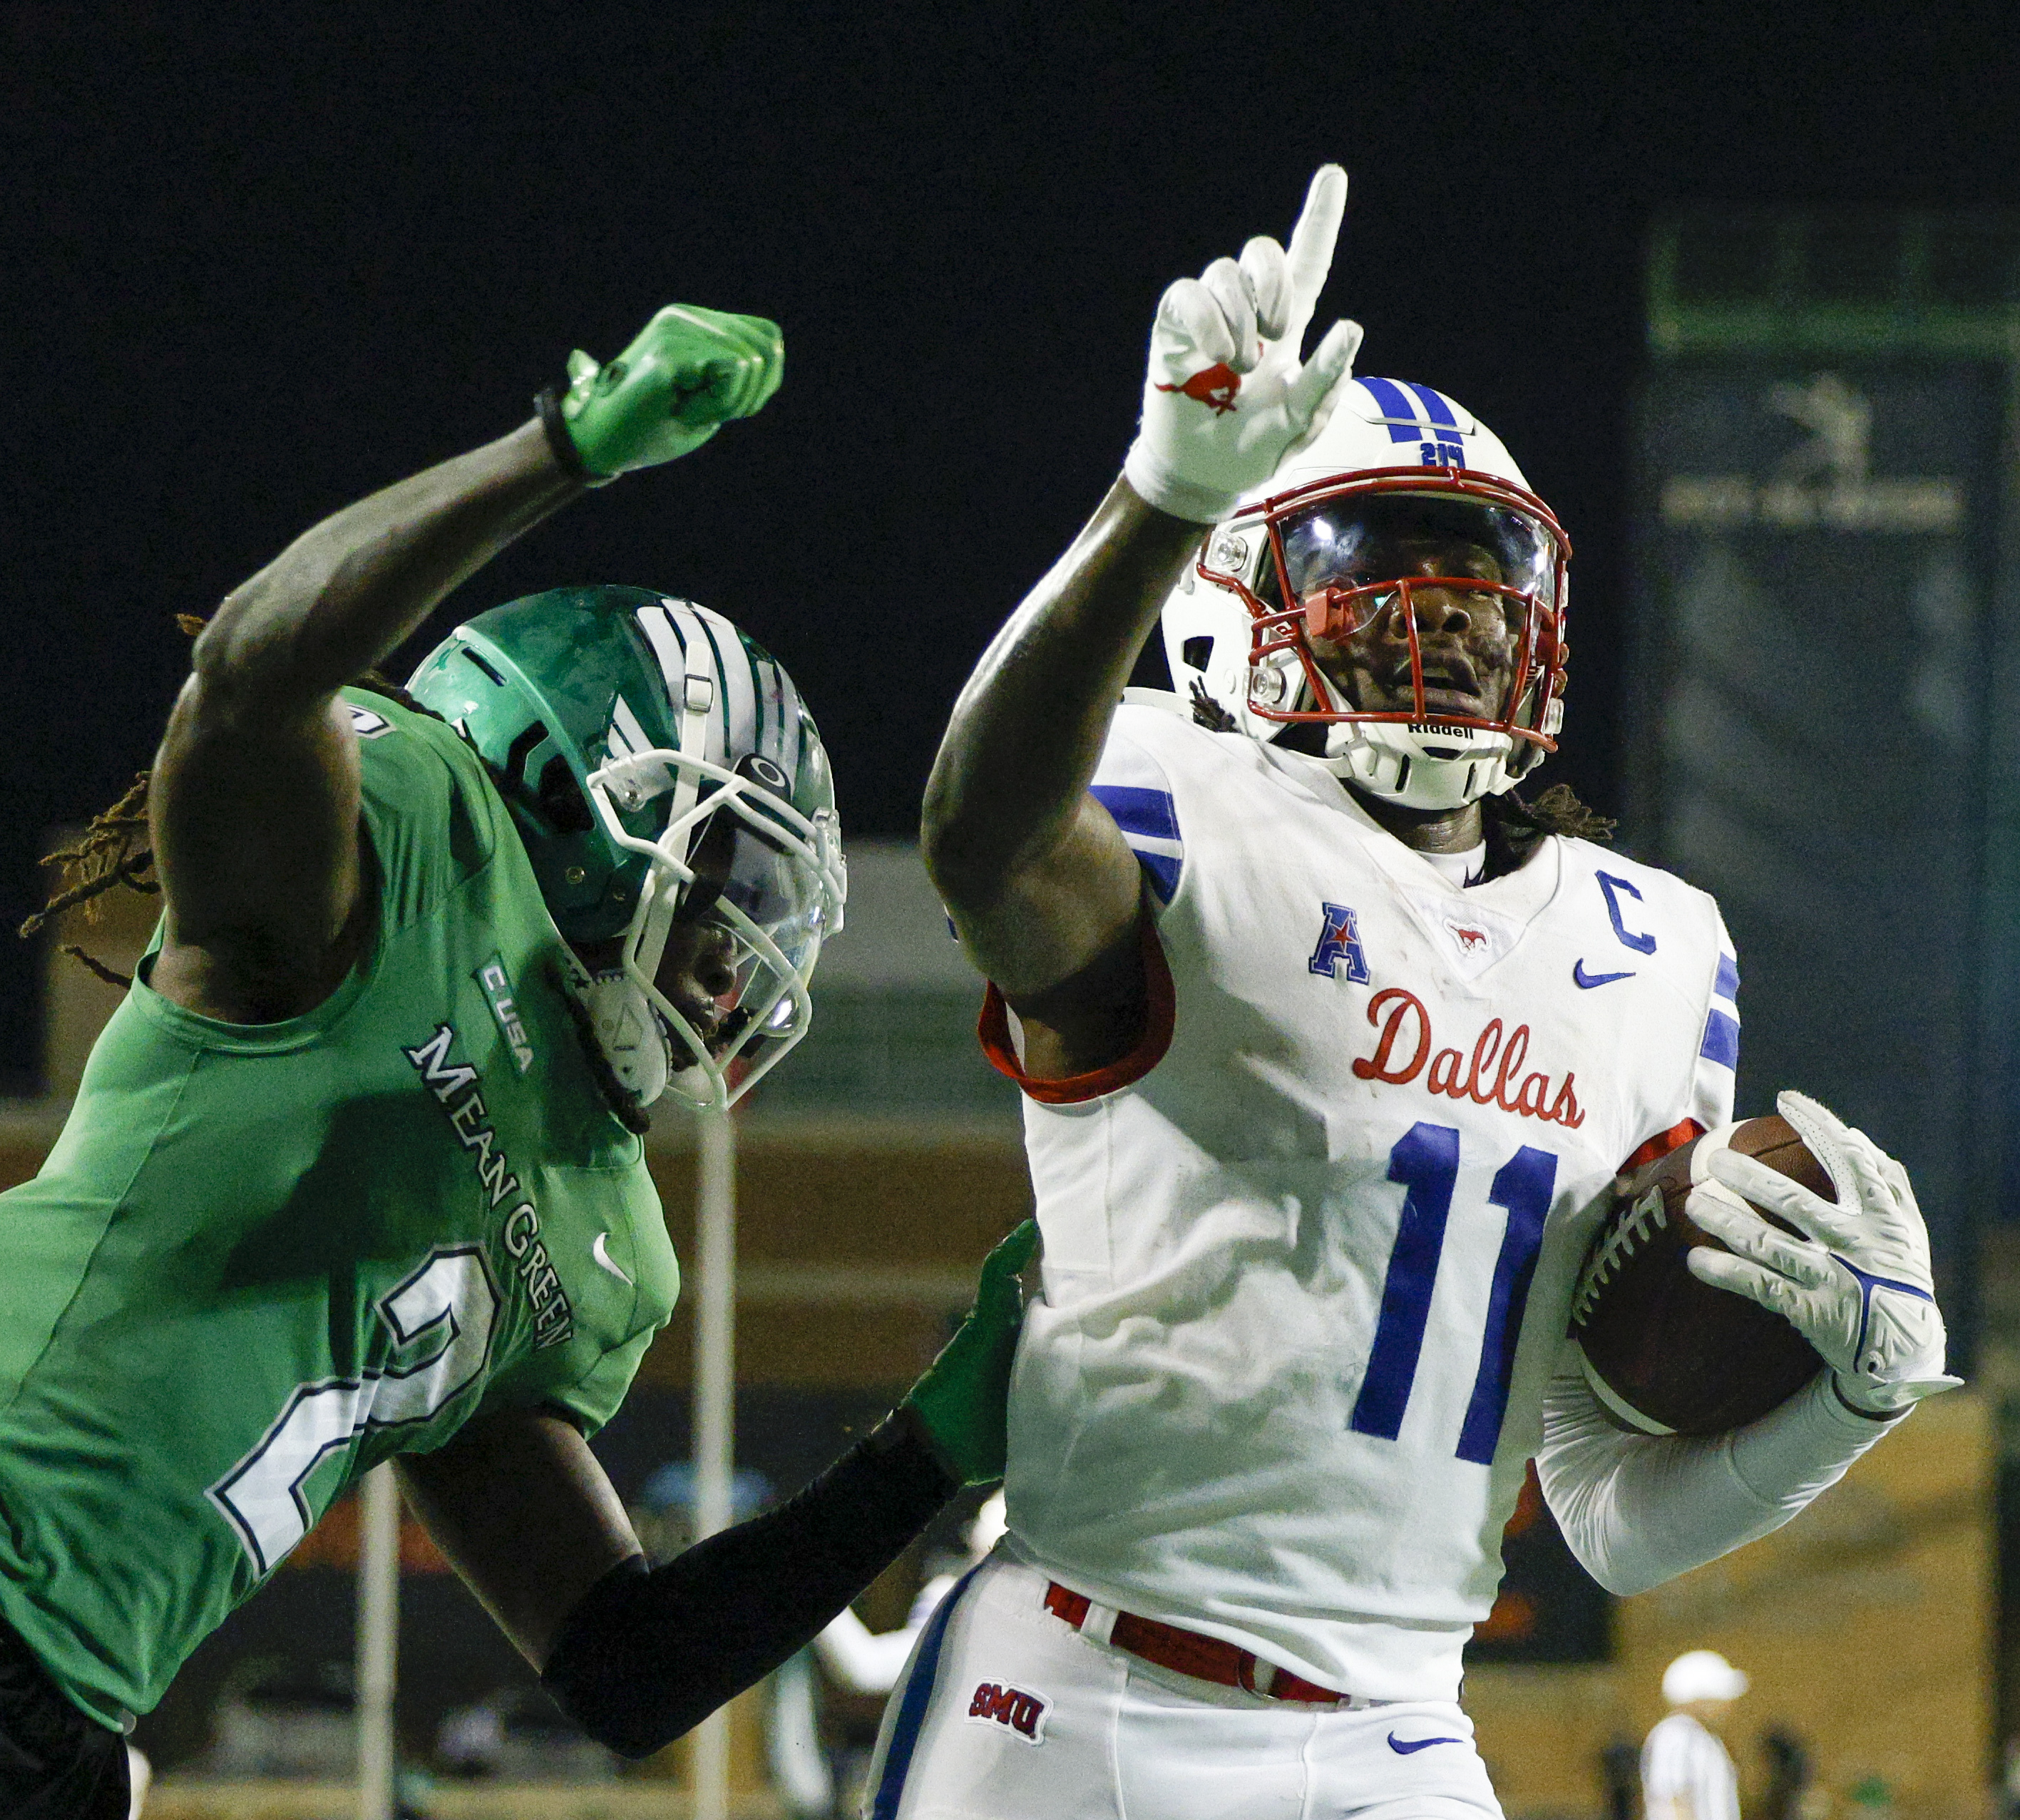 SMU wide receiver Rashee Rice (11) celebrated a touchdown catch in the end zone ahead of UNT...